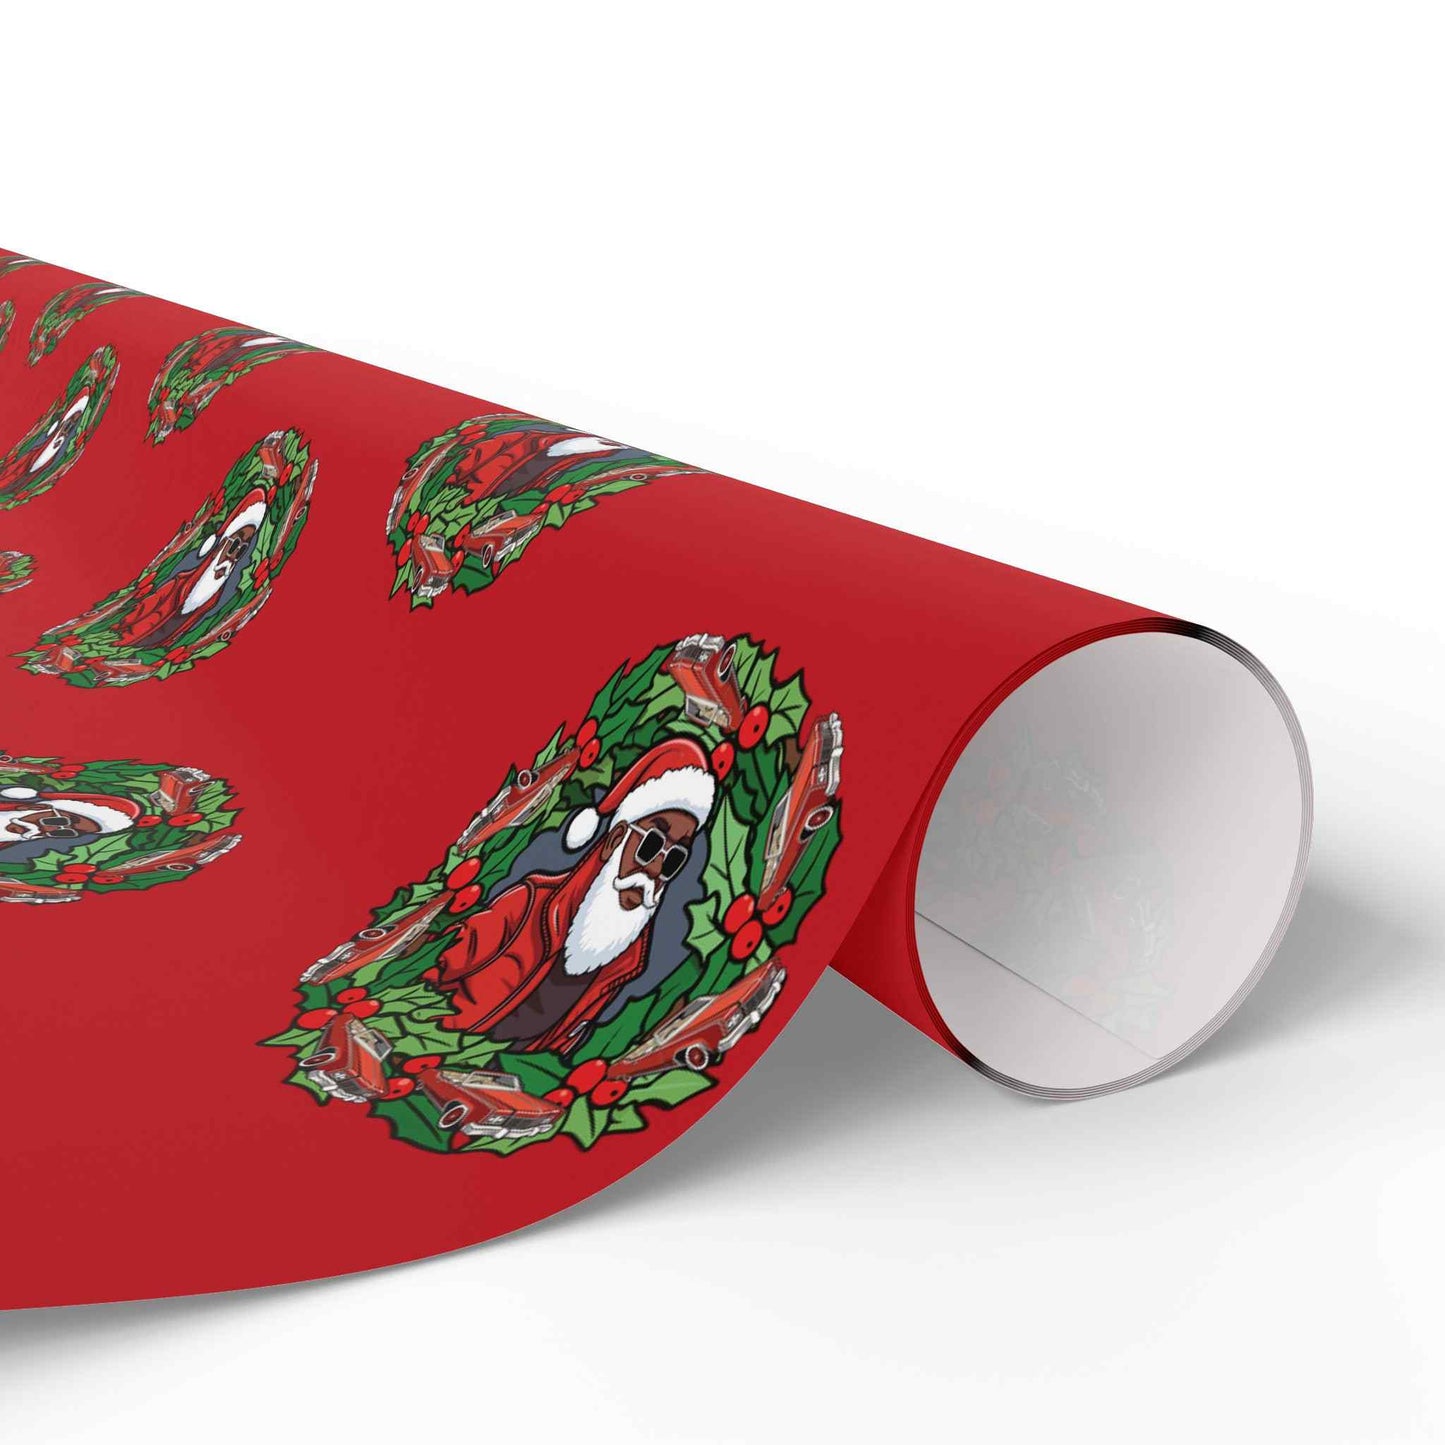 Sleighin' with Grandaddy Claus Red Wrapping Paper